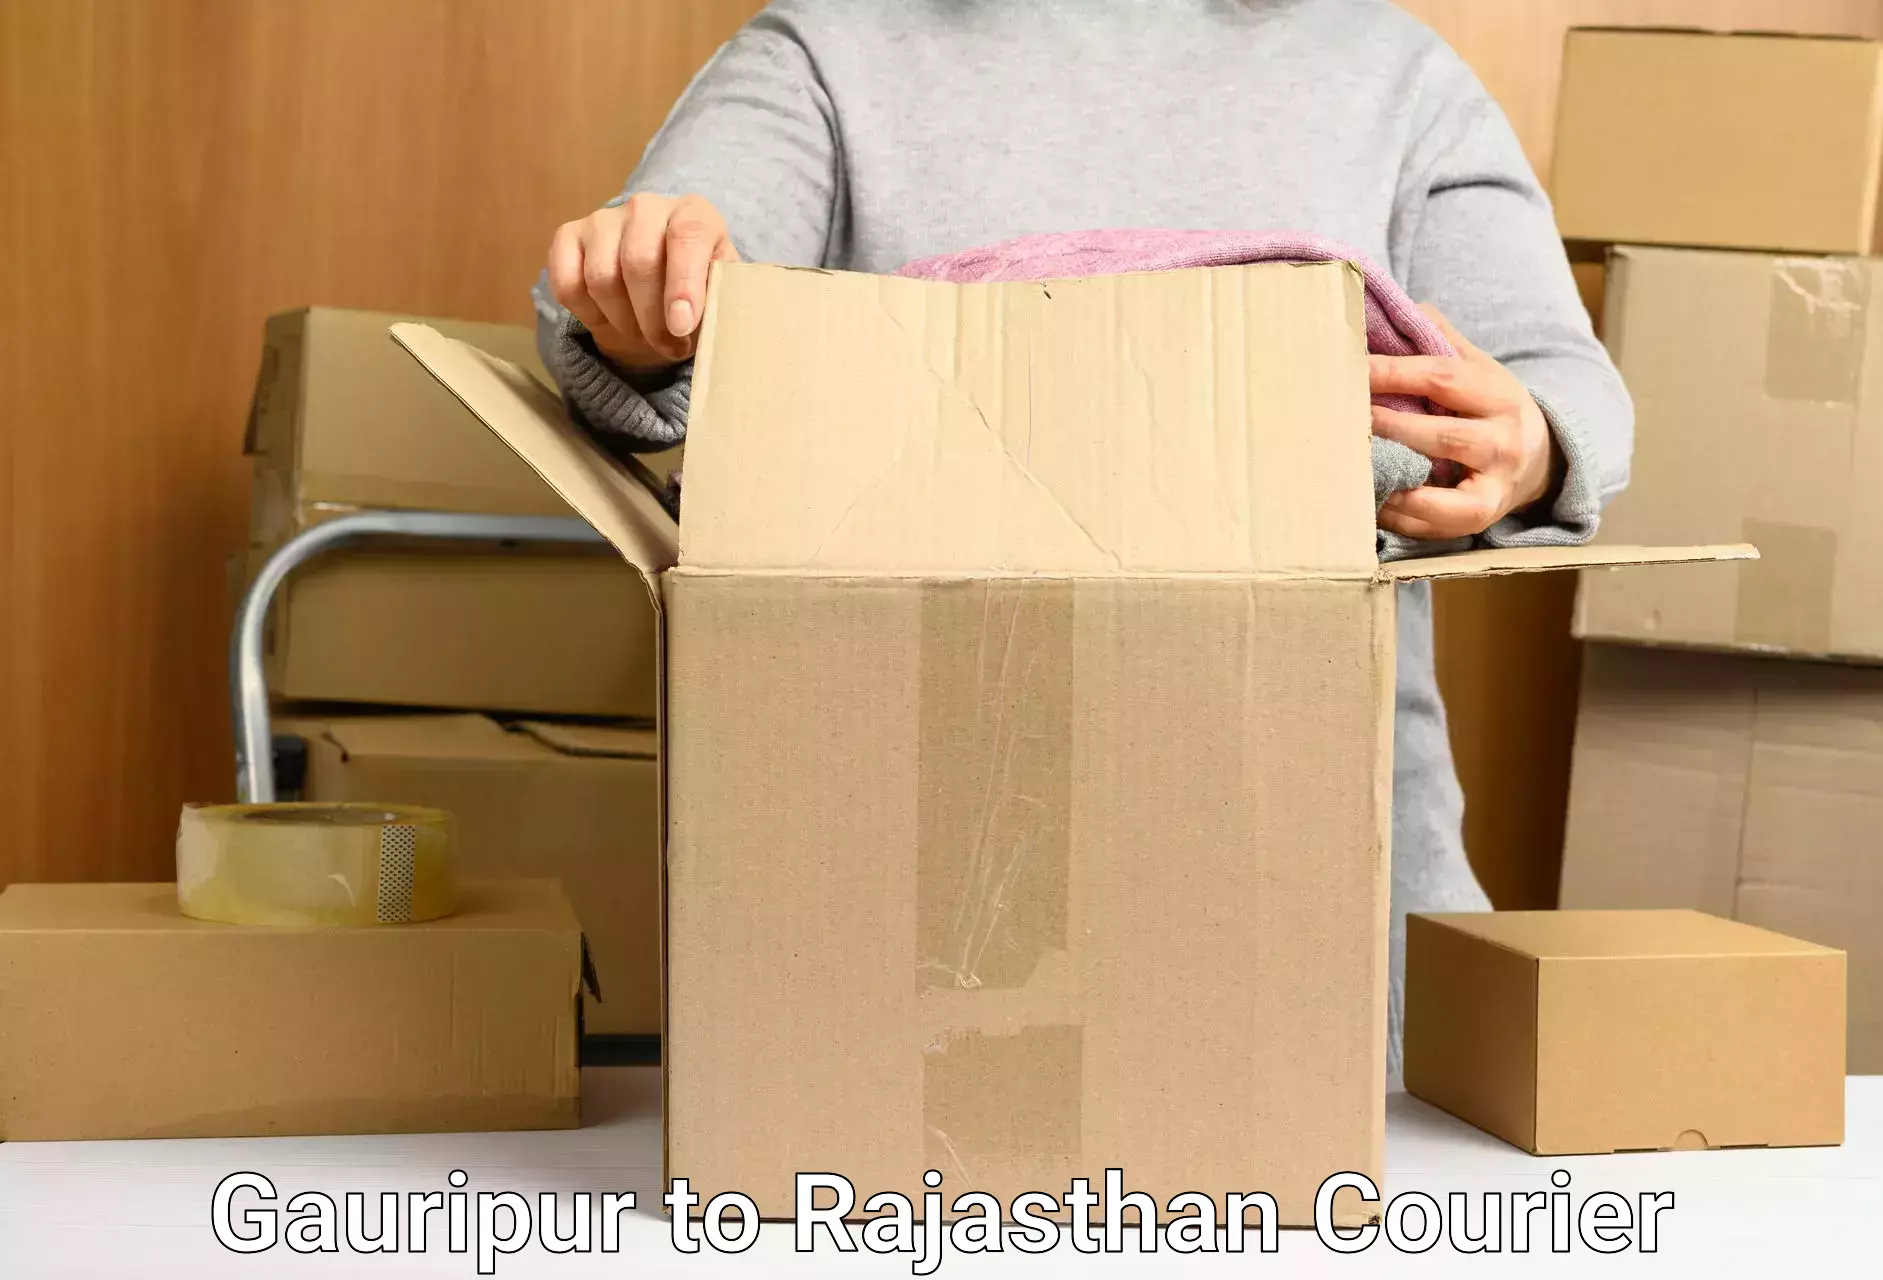 User-friendly courier app Gauripur to Rajasthan